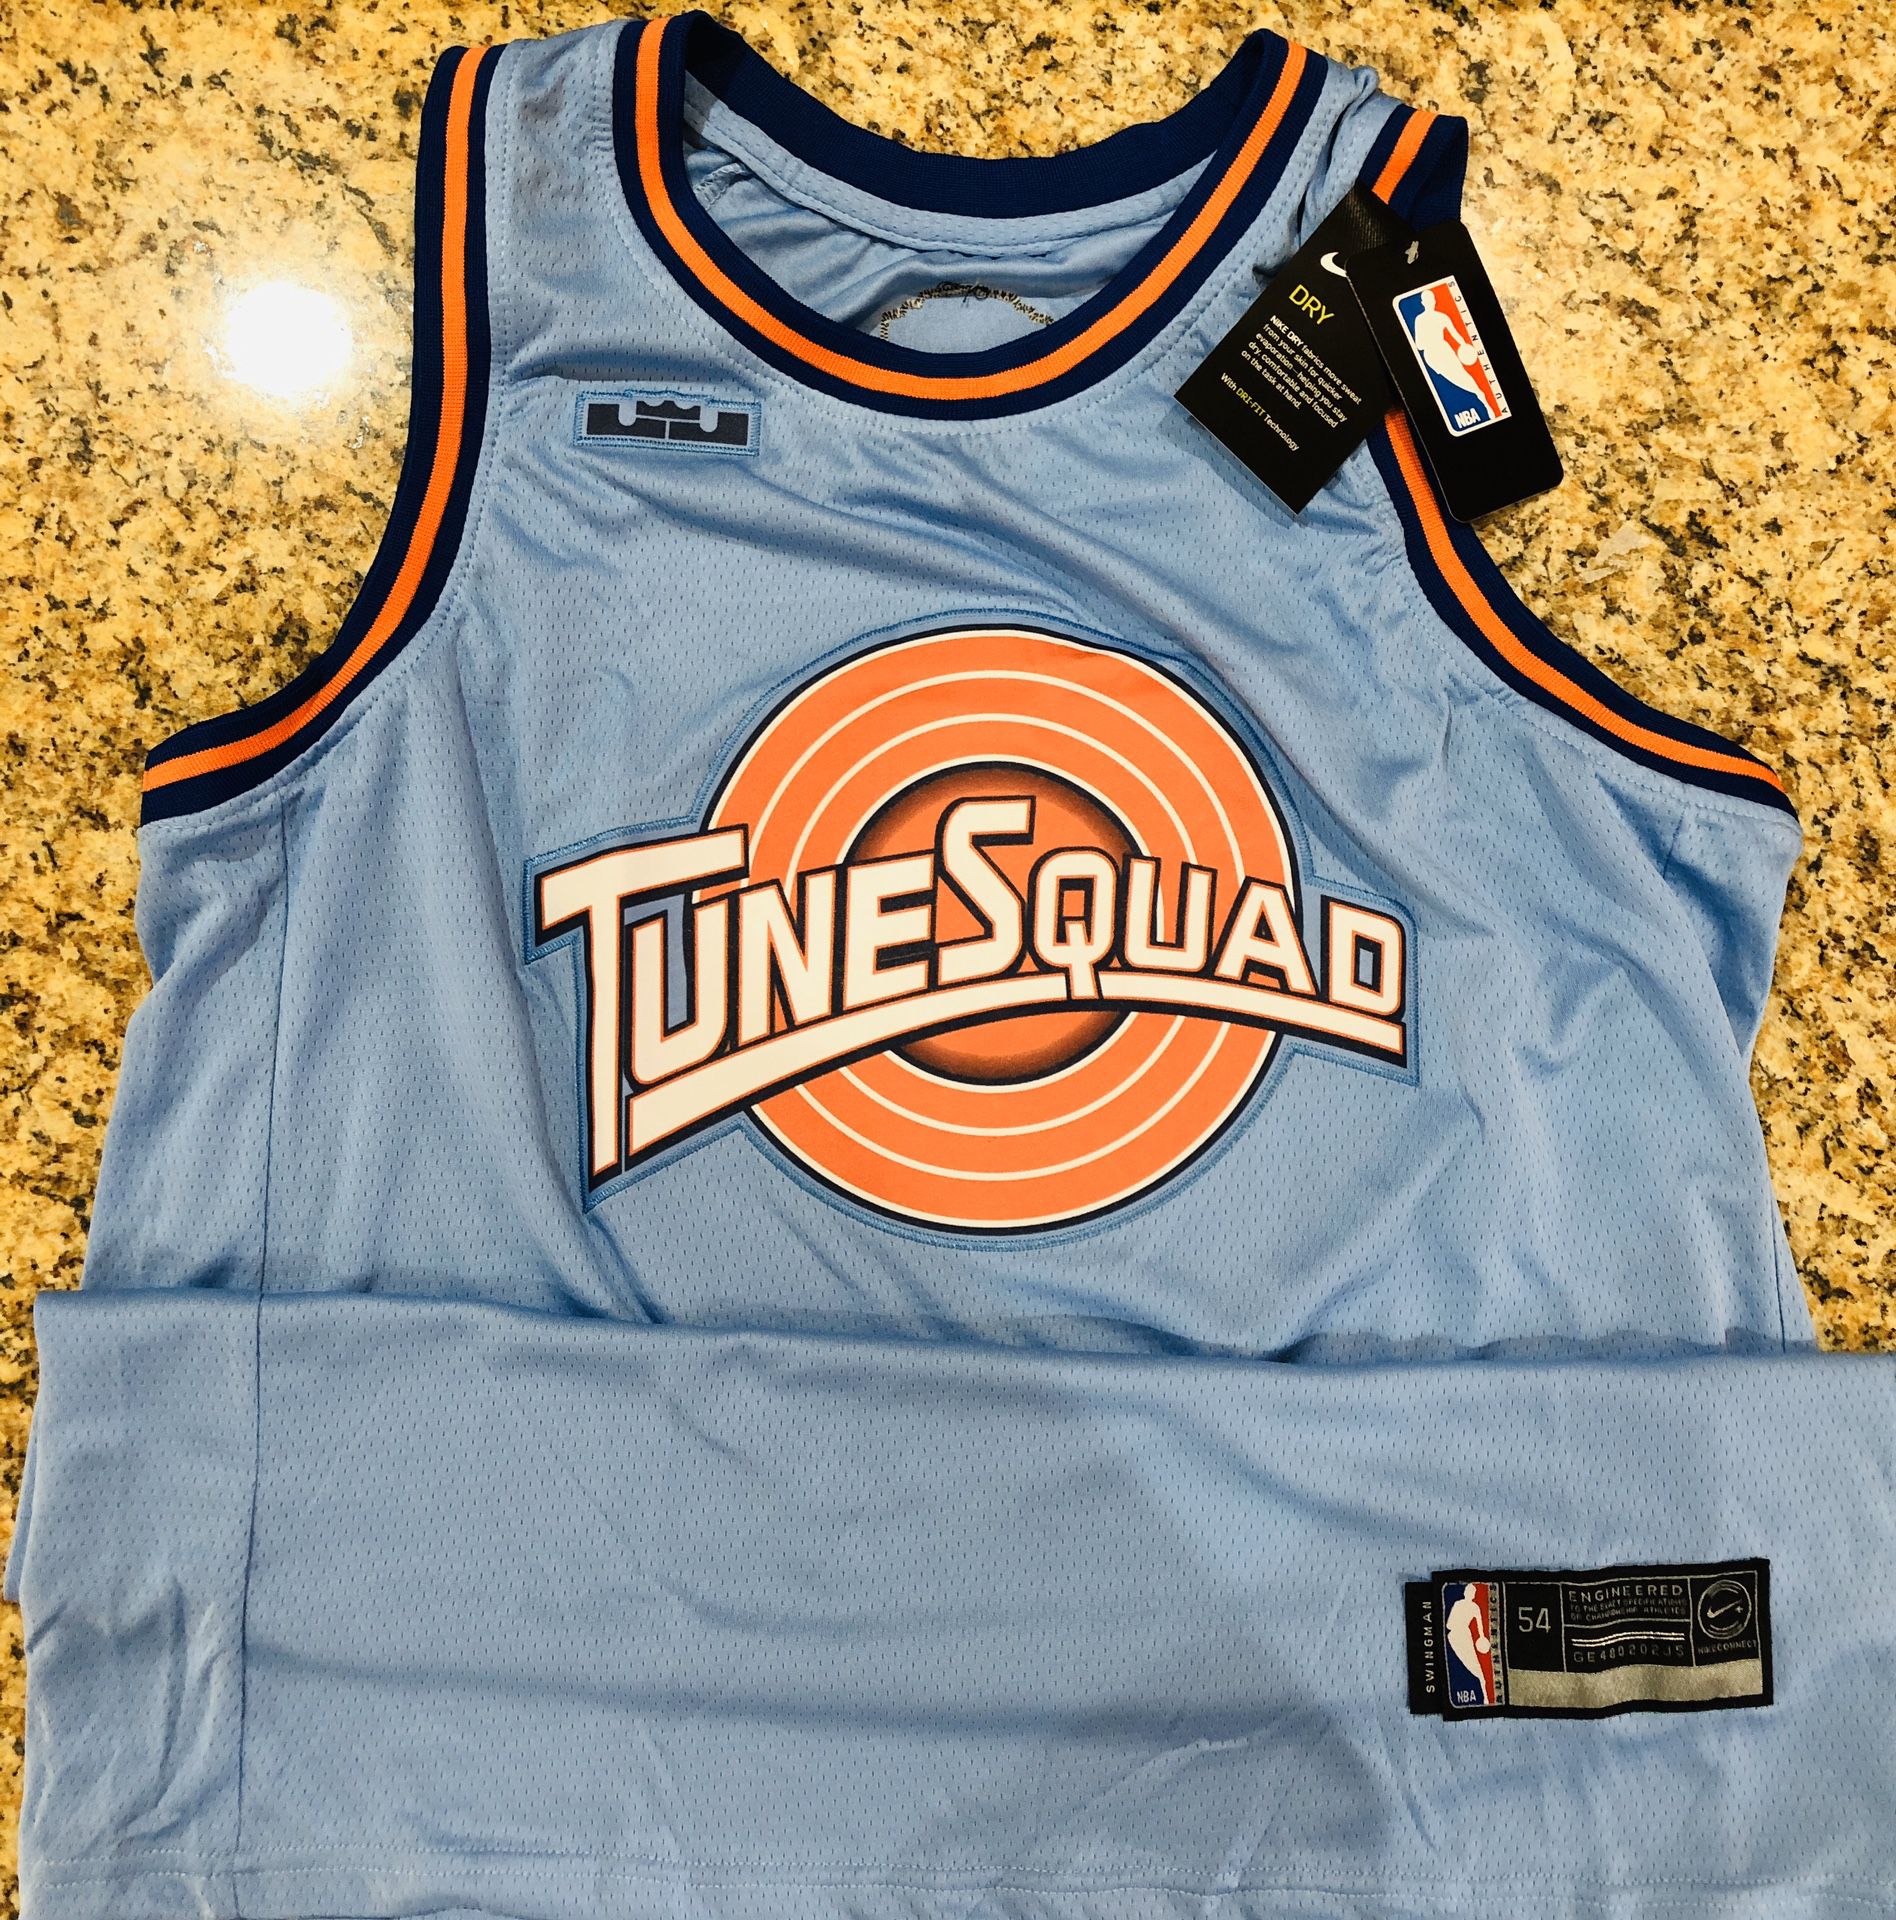 New!! Space Jam Lebron James Tune Squad Jersey!!